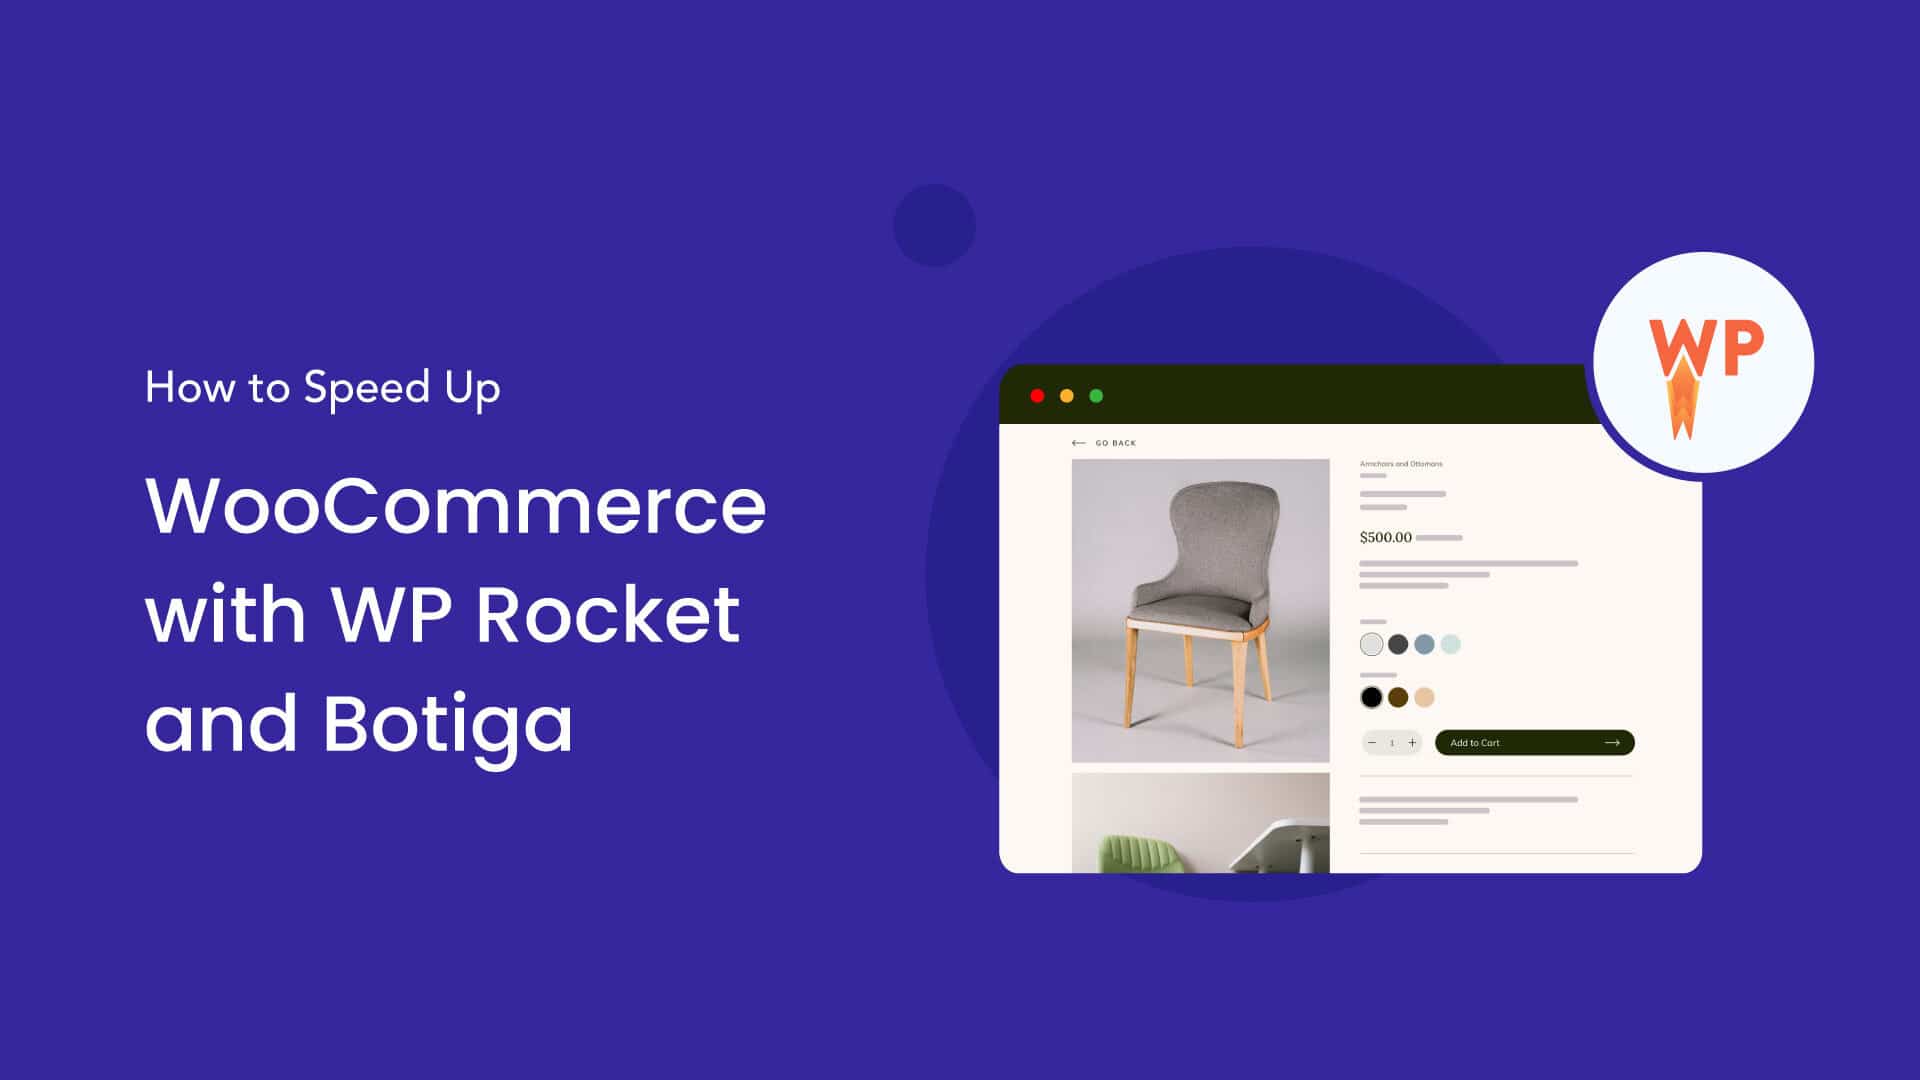 How to Speed Up WooCommerce with WP Rocket and Botiga